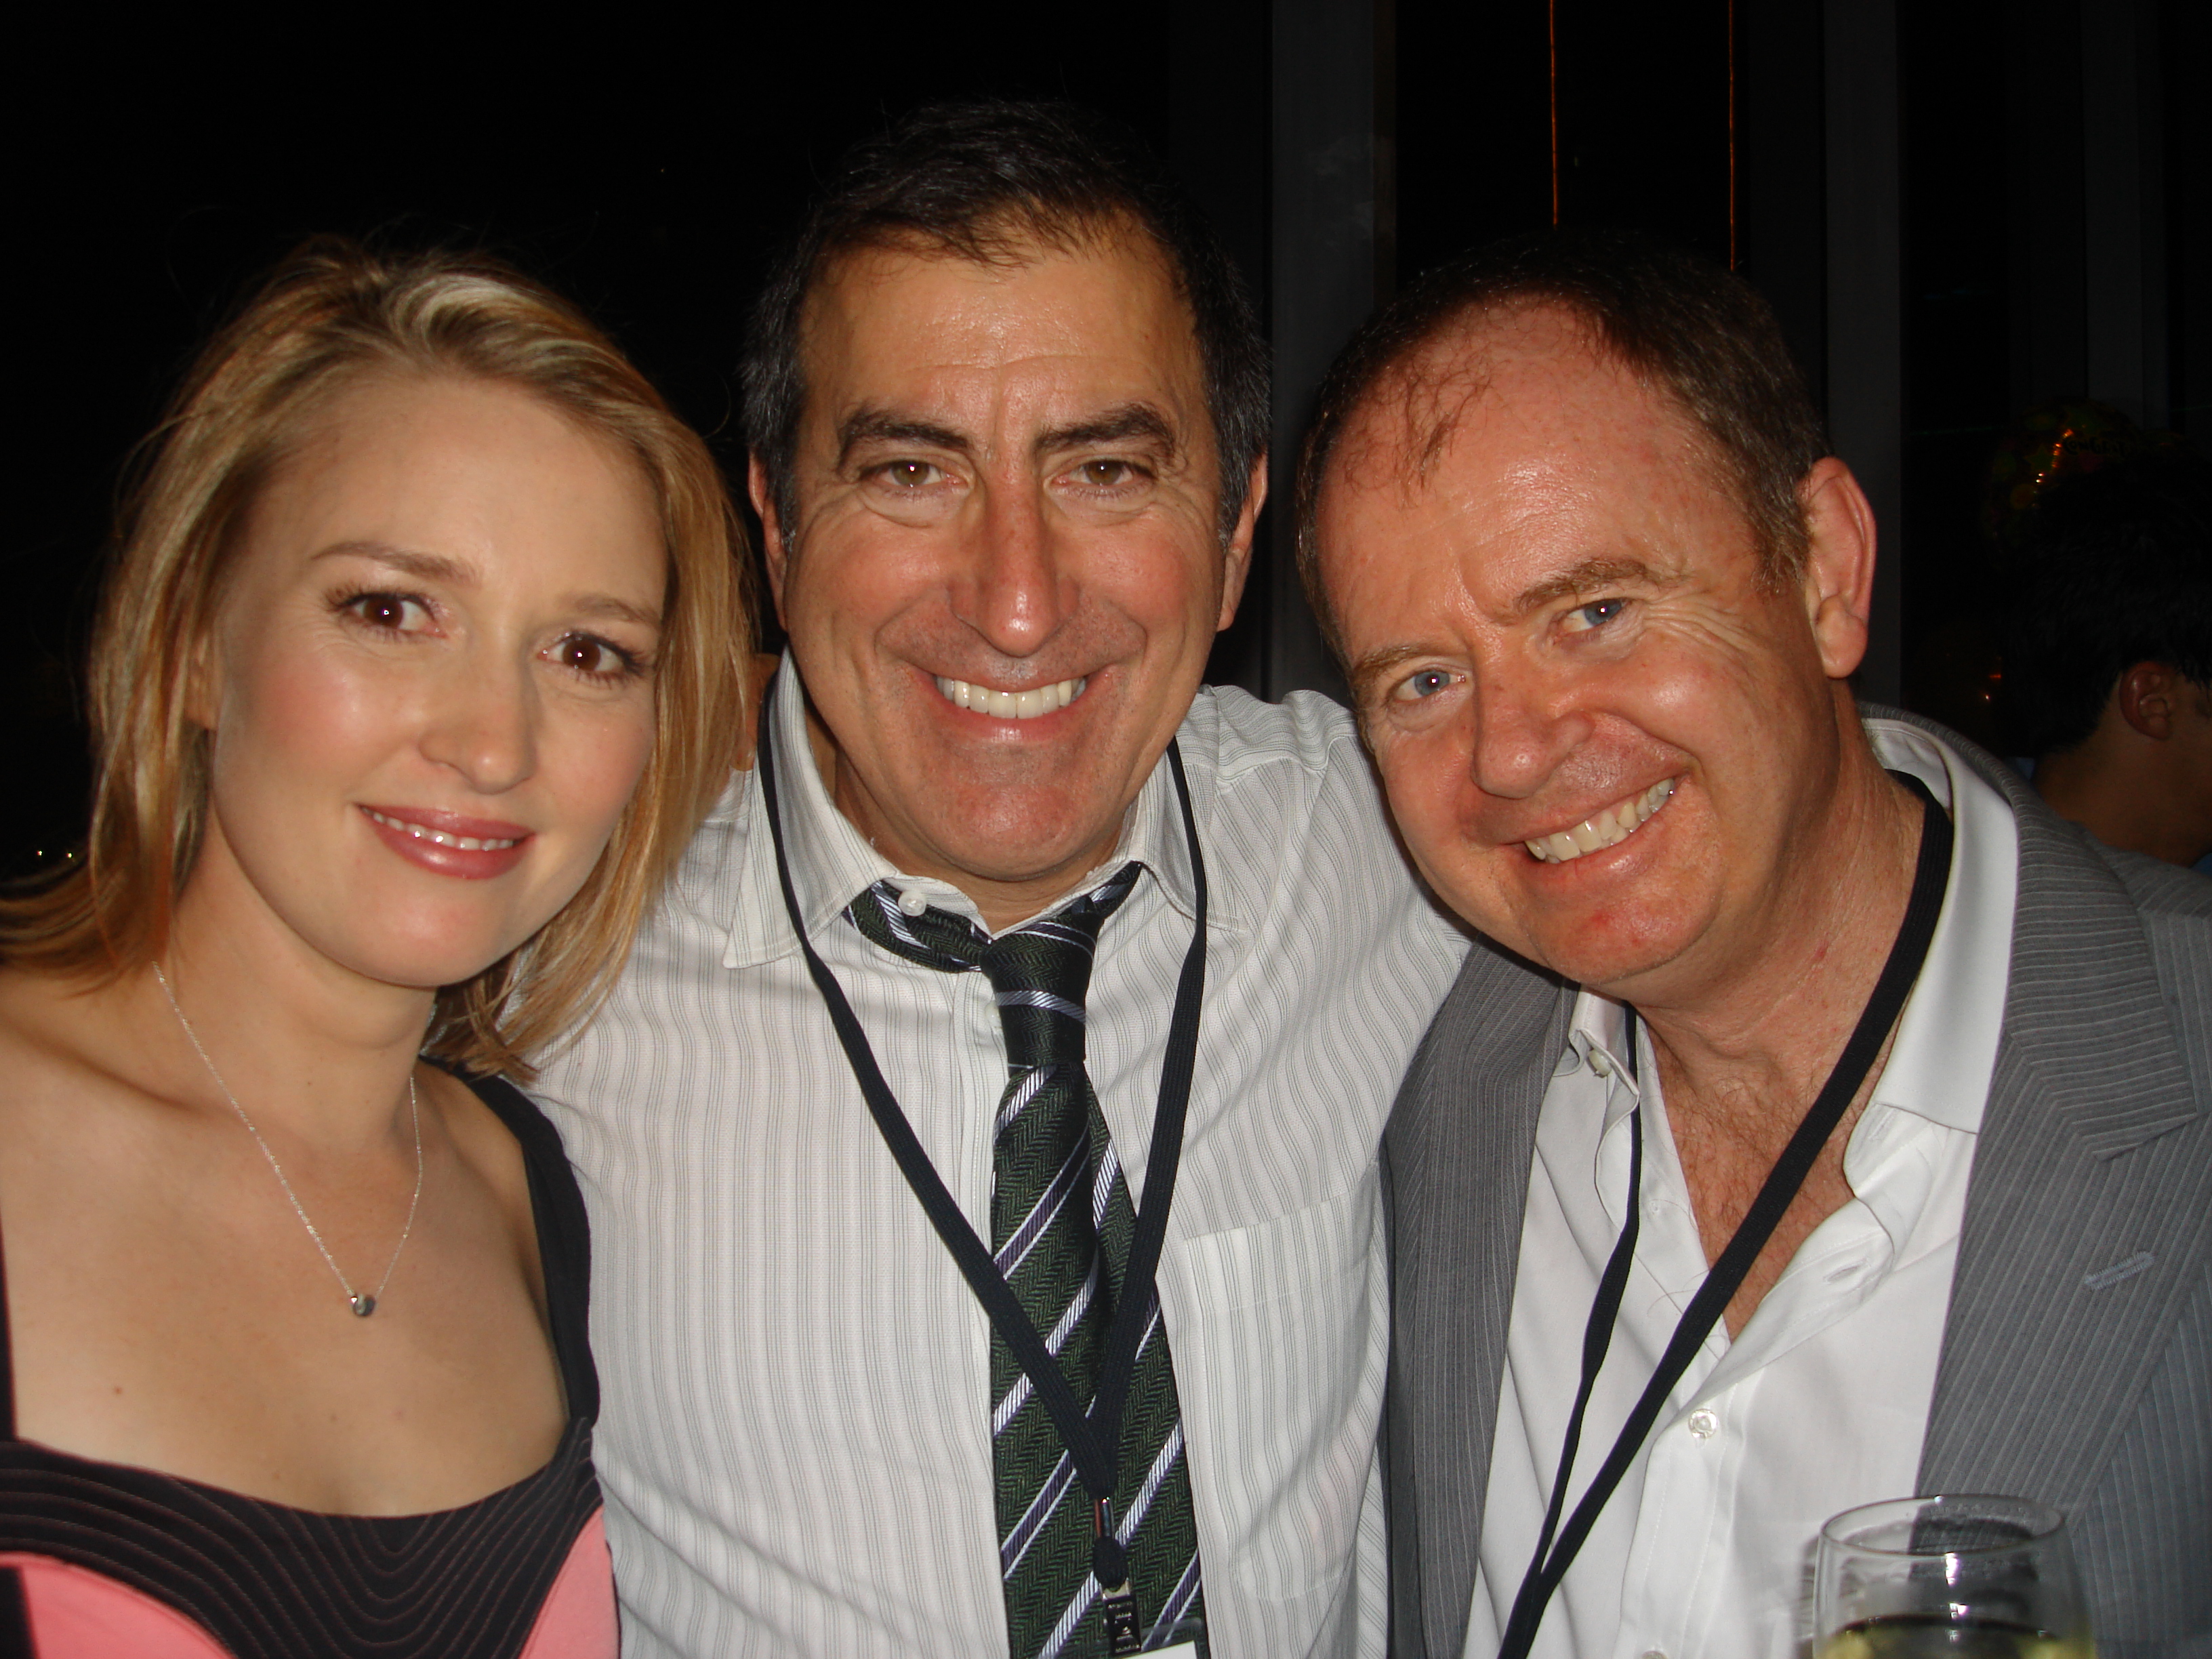 With Penny Murden and Director Kenny Ortega at the premiere of 'The Boy From Oz - Arena Spectacular' starring Hugh Jackman in 2006.